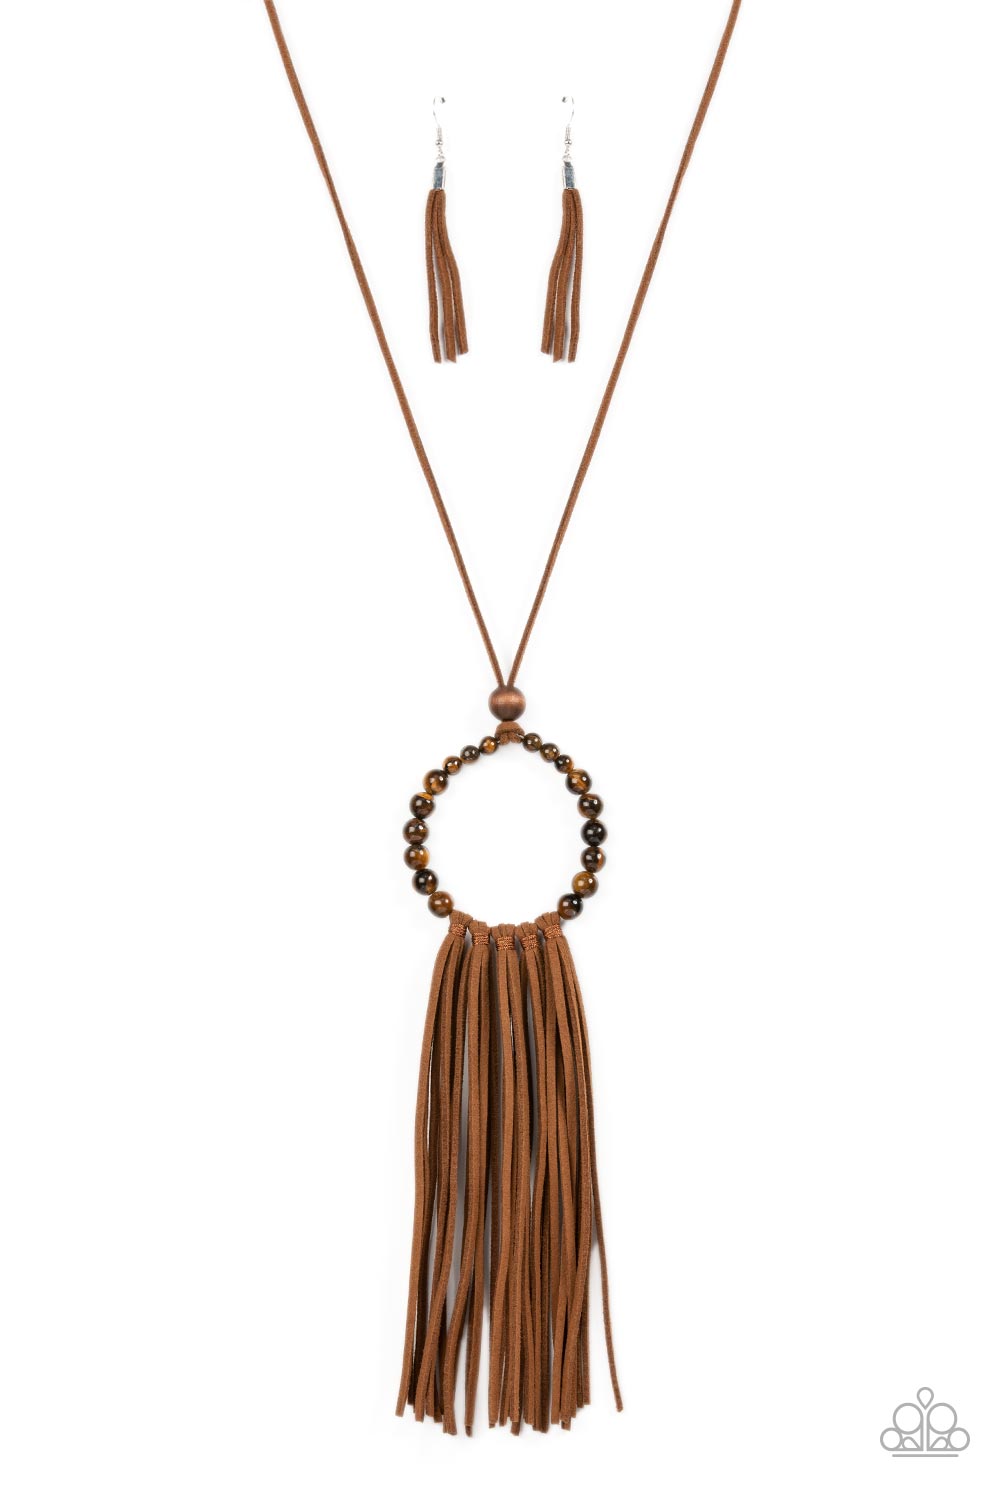 Namaste Mama Paparazzi Accessories Necklace with Earrings - Brown